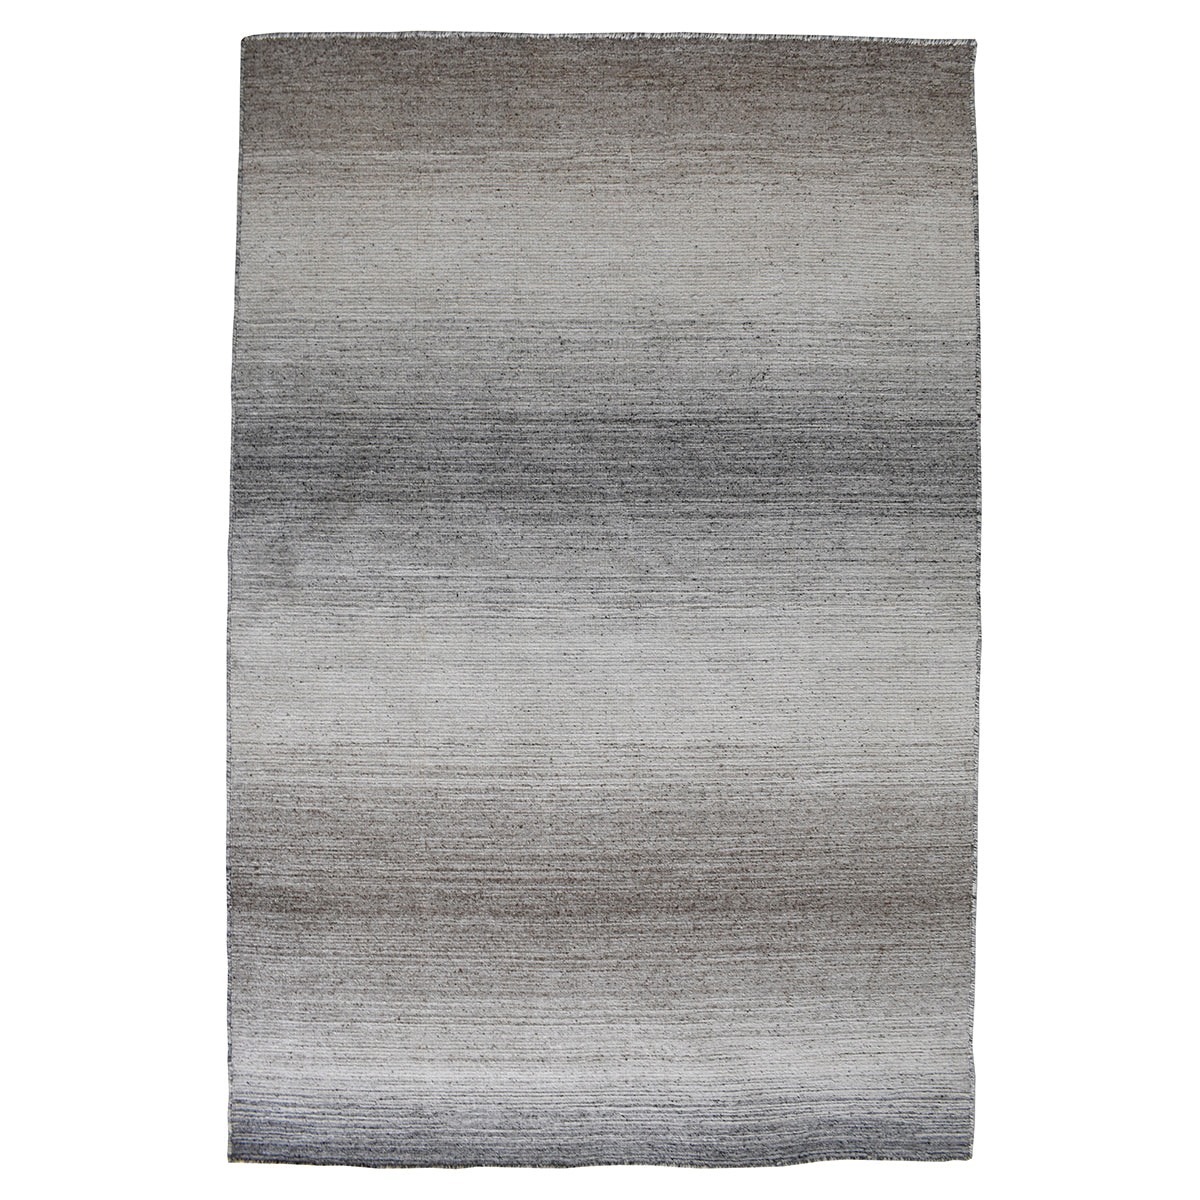 Ombre Rug Grey/Taupe 1200x1700mm